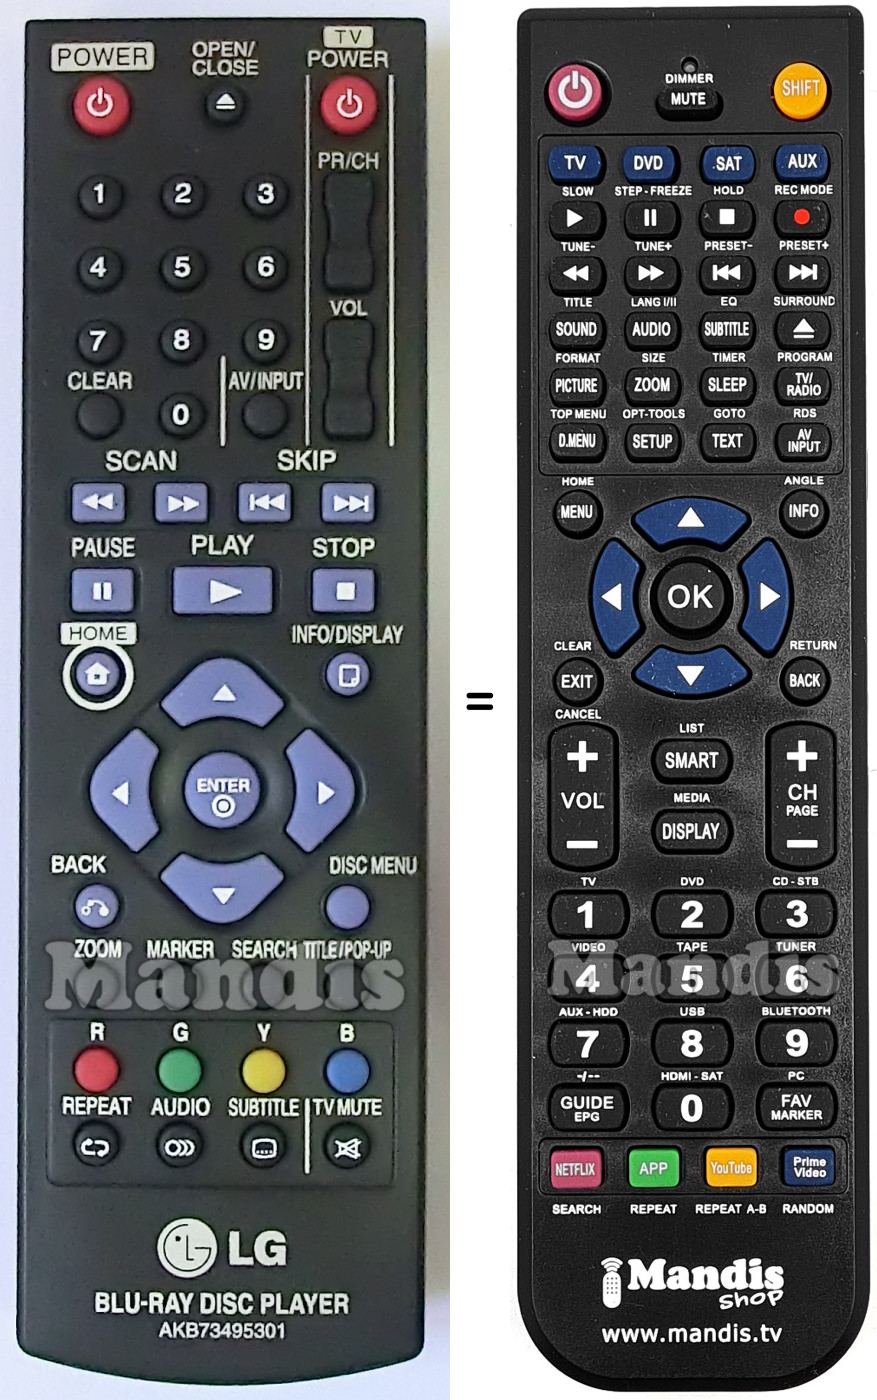 Replacement remote control LG AKB73495301